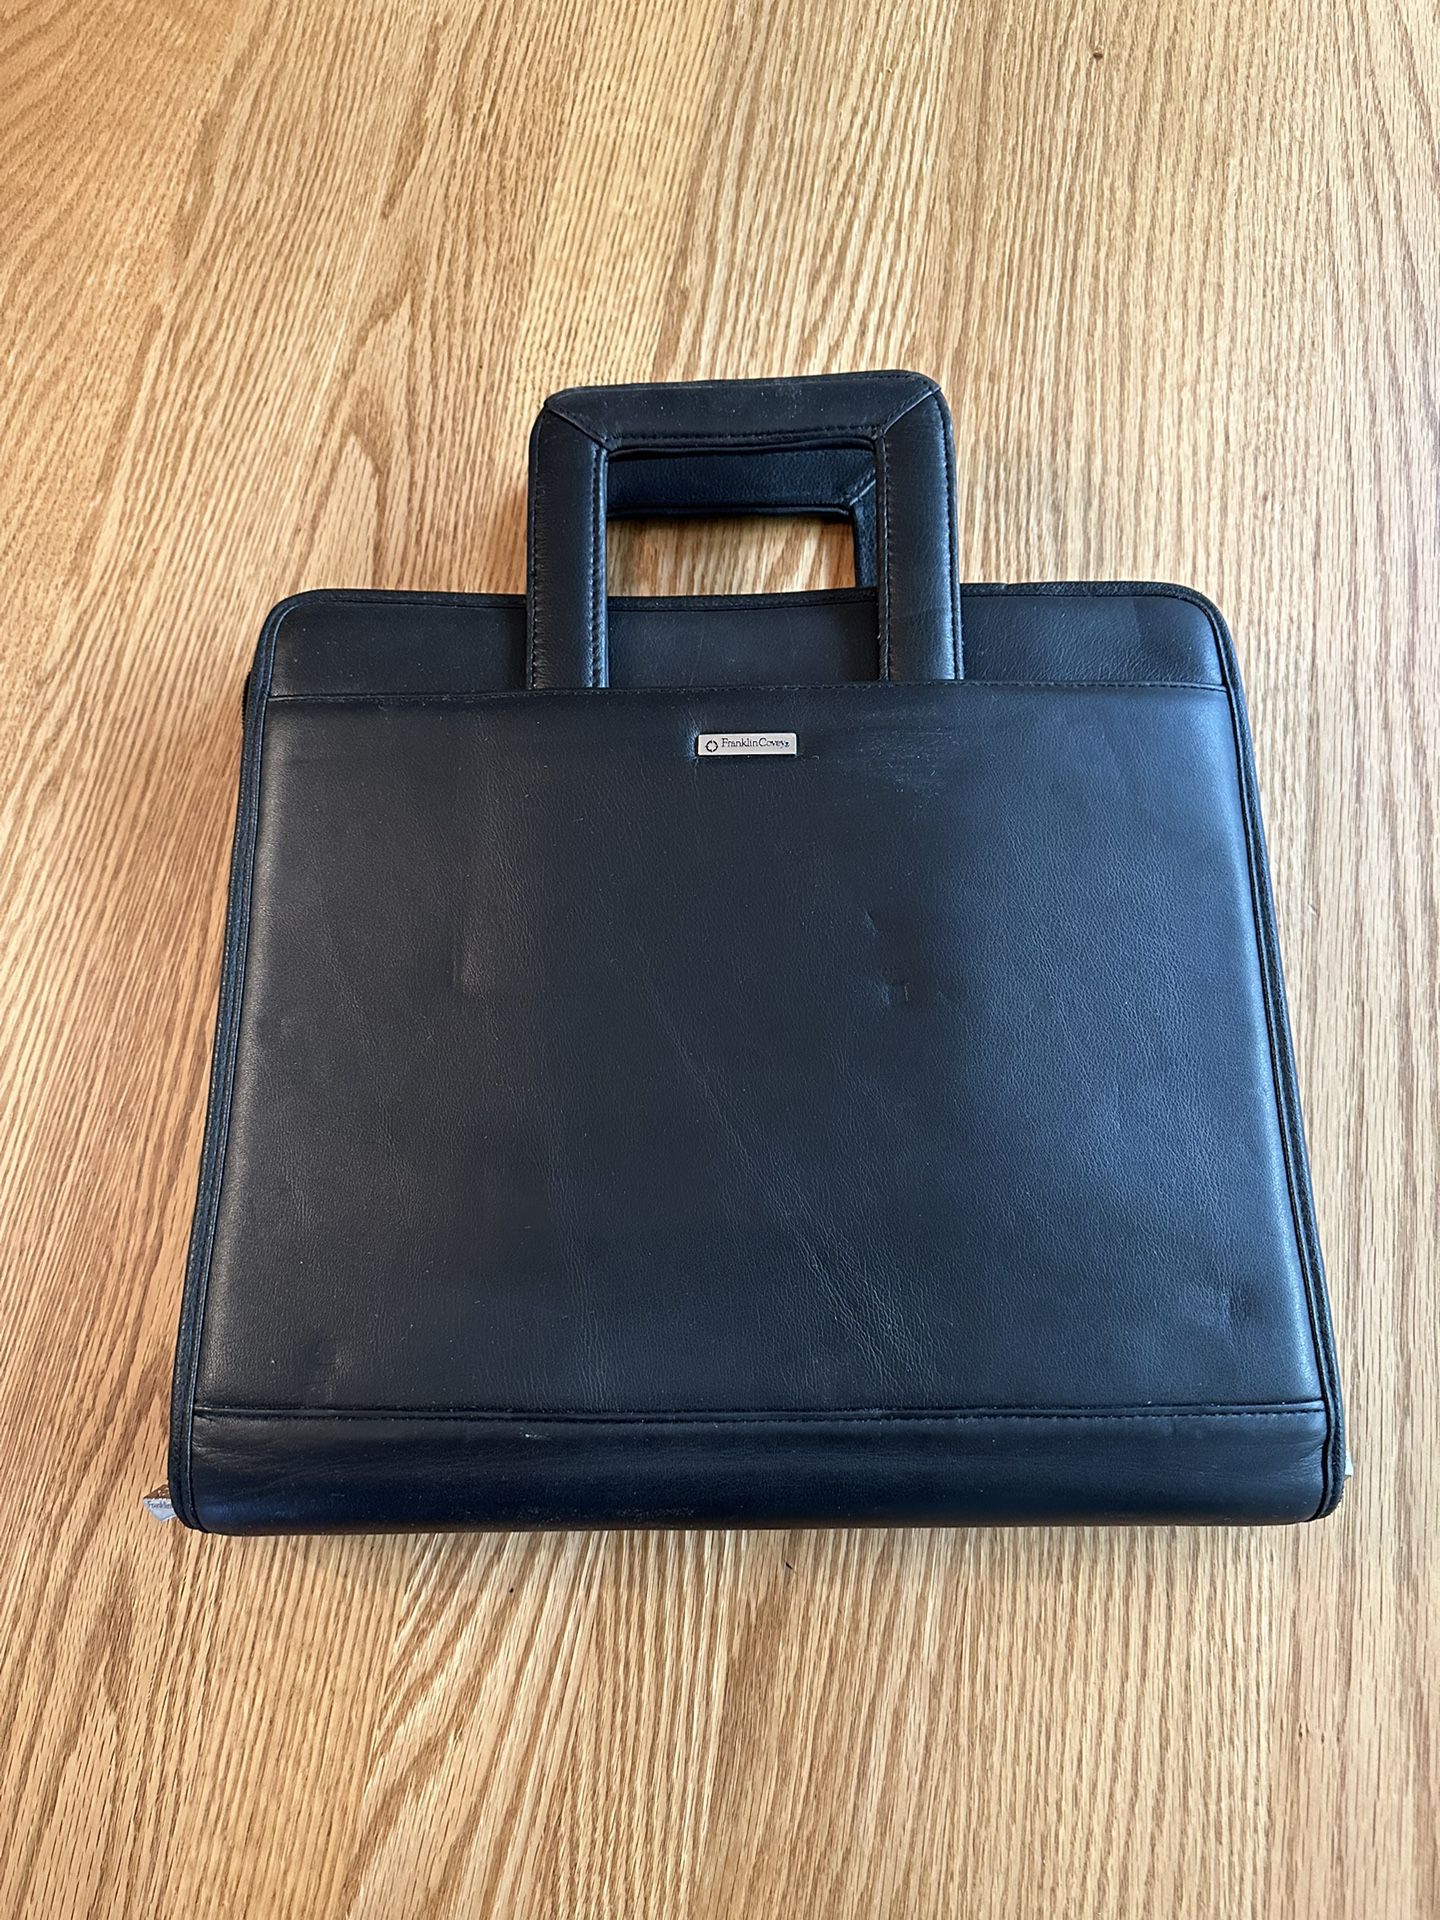 Leather Business Tote Organizer - NEW for Sale in Henderson, NV - OfferUp